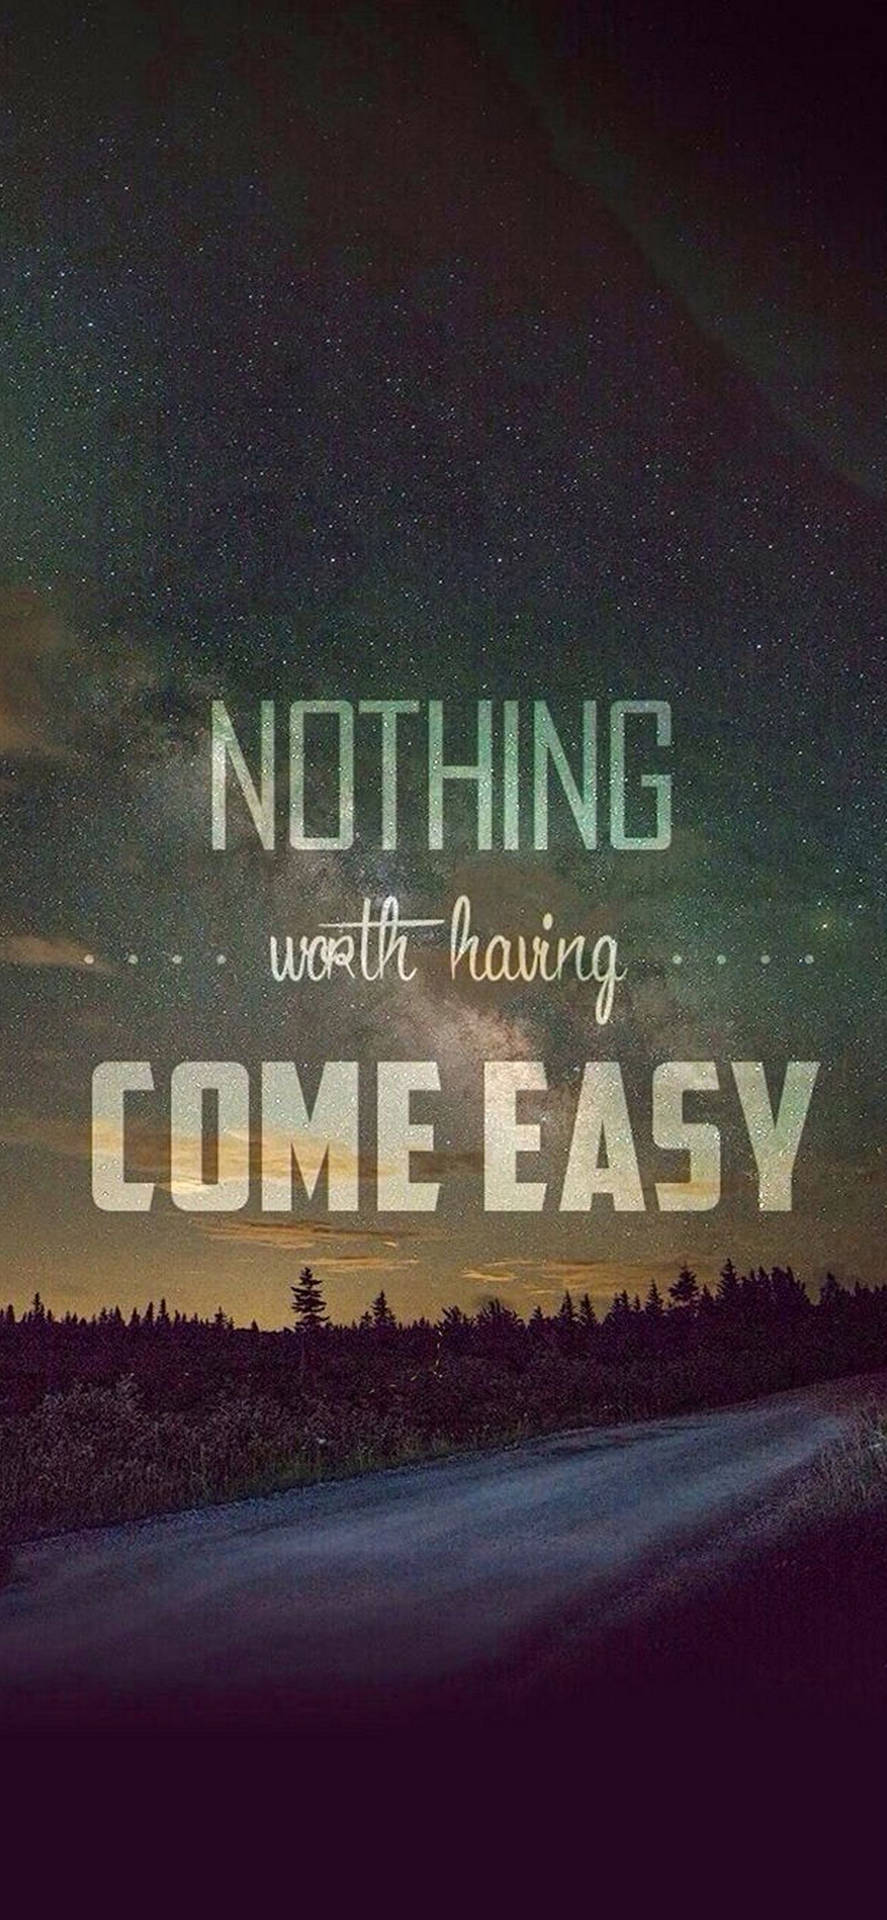 Nothing Come Easy Motivational Iphone Wallpaper